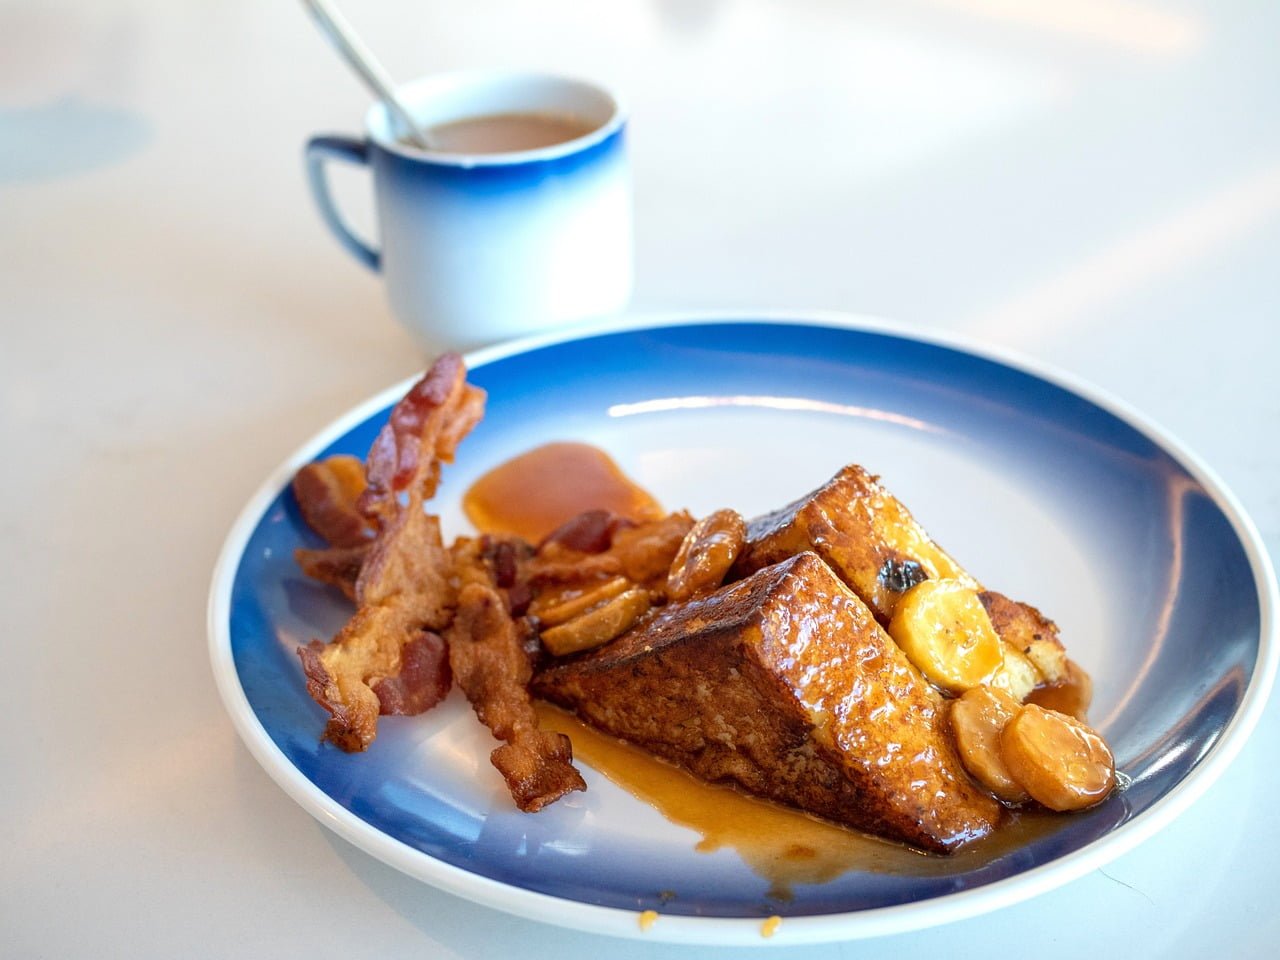 A plate of French toast topped with sliced bananas and syrup, accompanied by strips of bacon, with a cup of tea in the background.